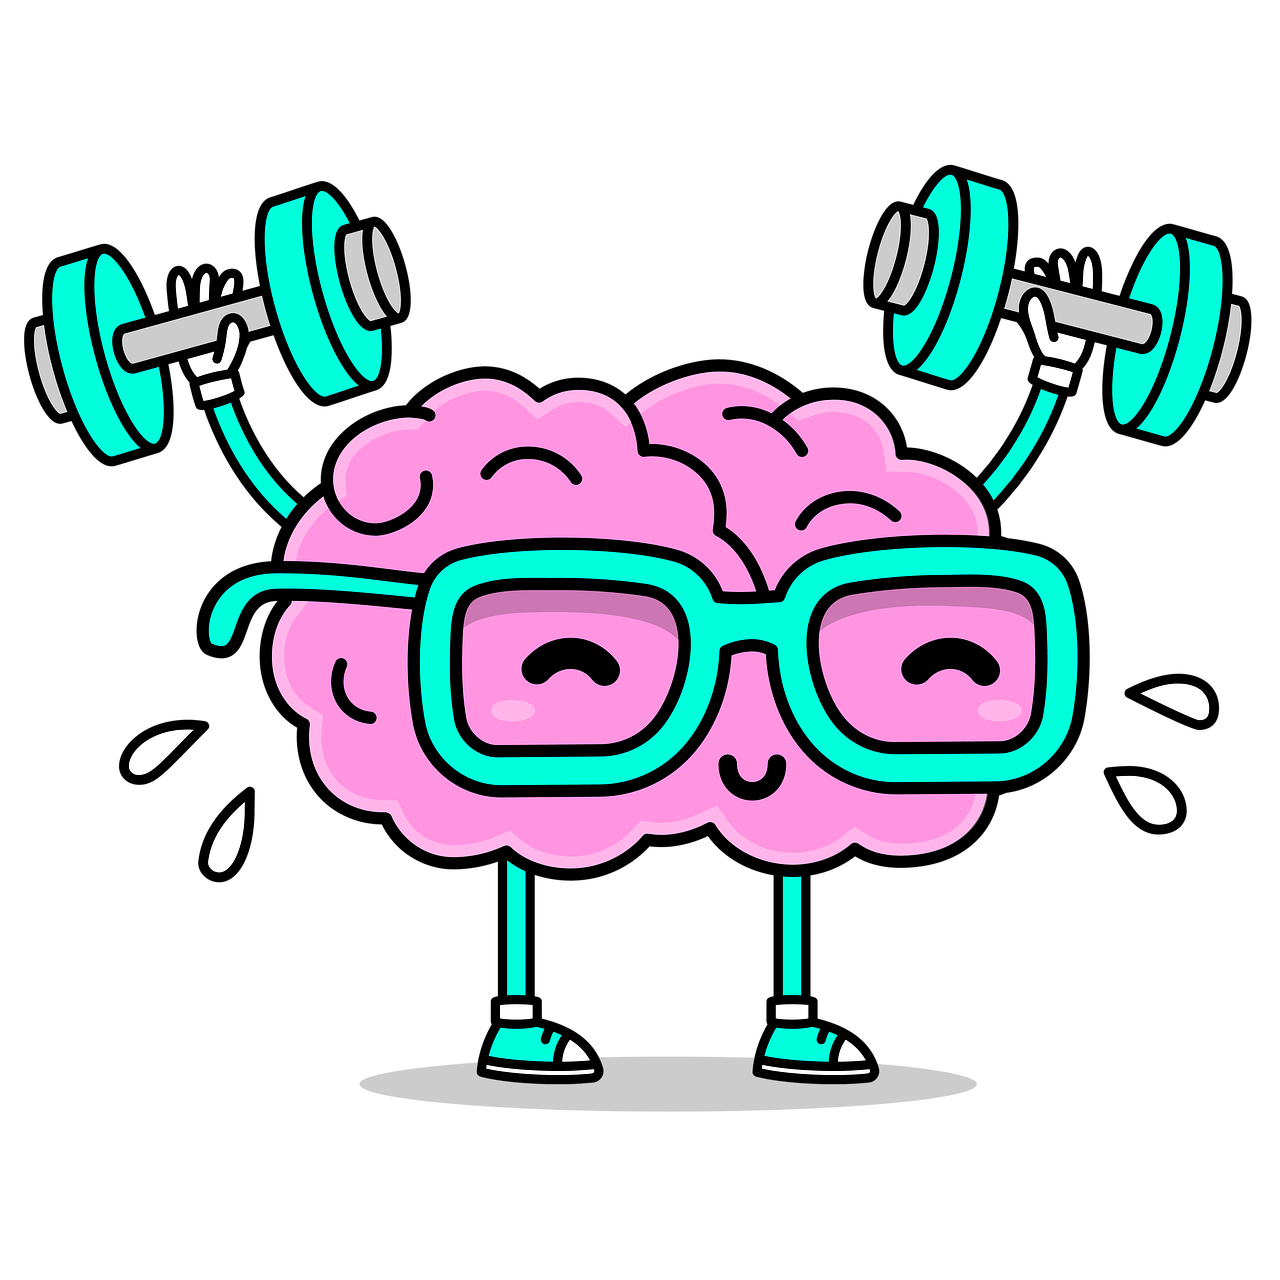 A picture of a brain lifting weights